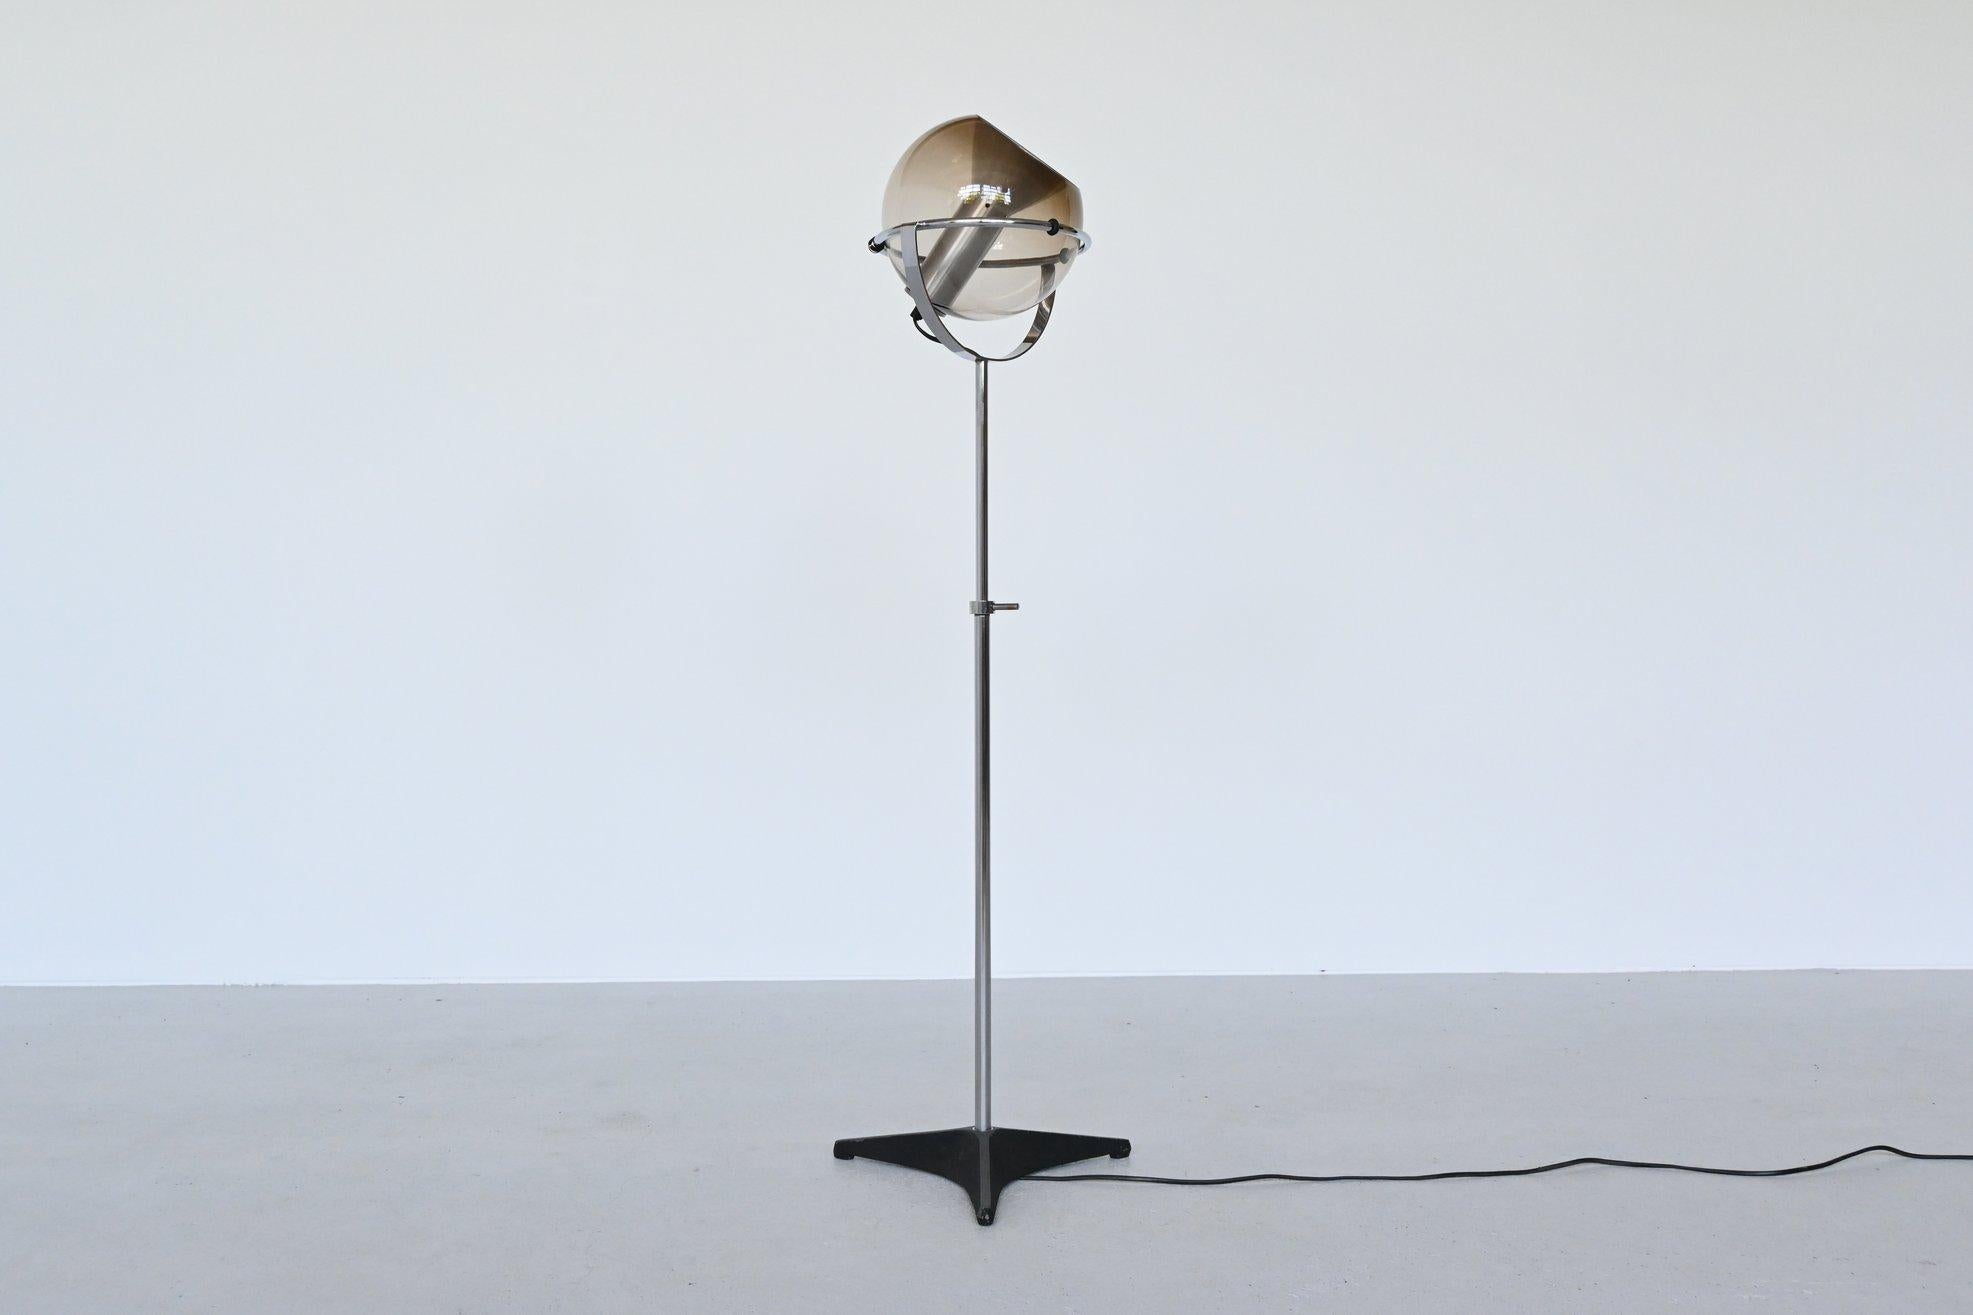 Beautiful Globe 2000 floor lamp designed by Frank Ligtelijn for RAAK Amsterdam, Netherlands, 1960. It has a light smoked glass globe supported by a chromed metal ring. Inside the globe is an aluminum reflector. Standing on a chromed metal rod and